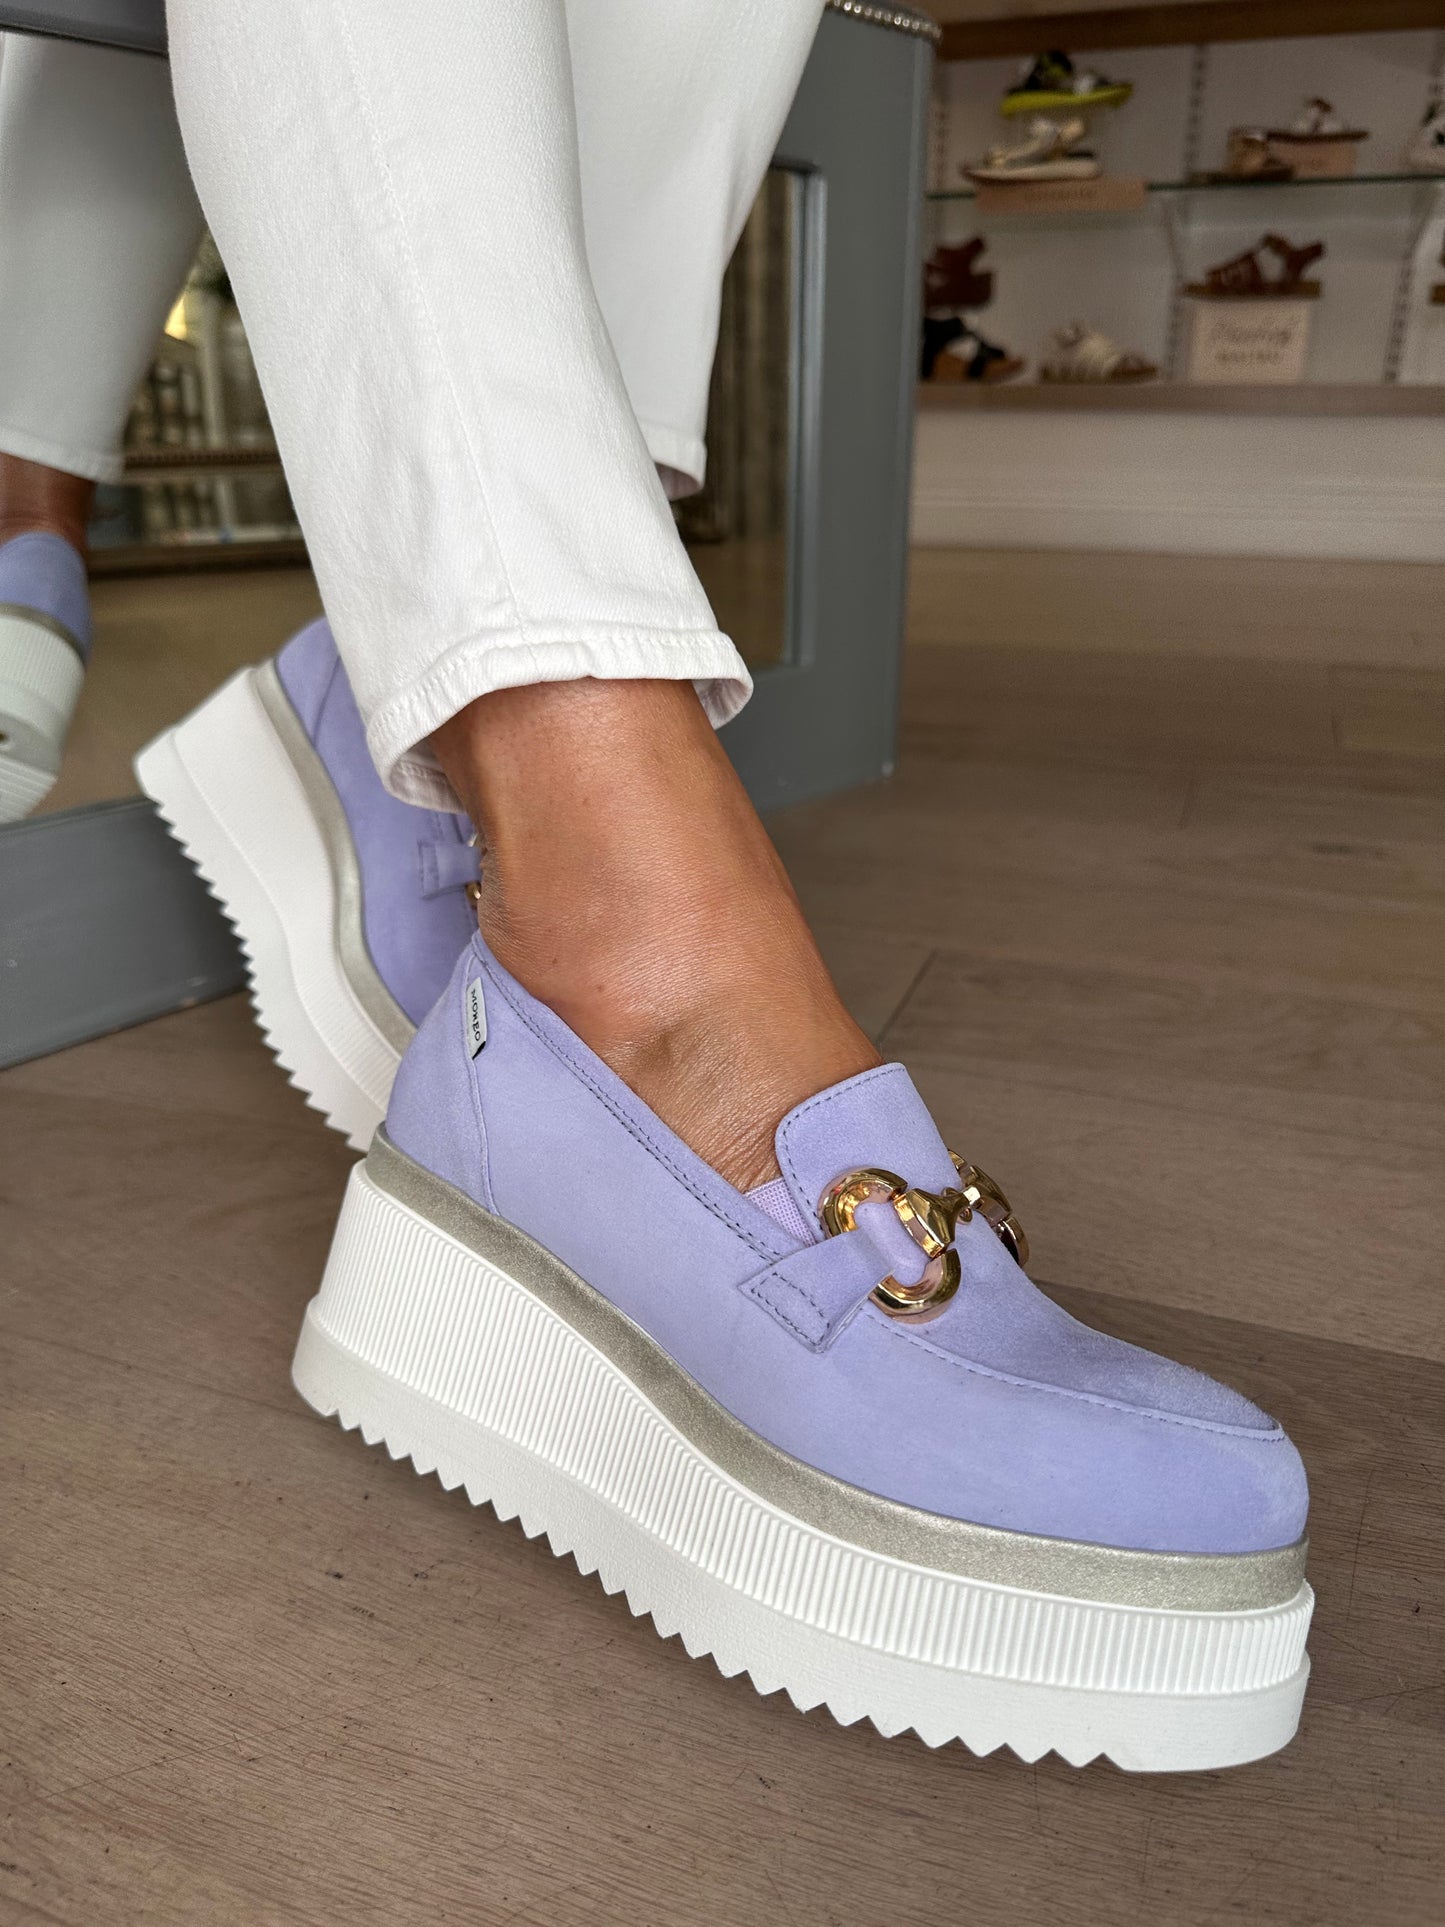 Marco Moreo - Lavender Suede Chunky Slip On Shoe